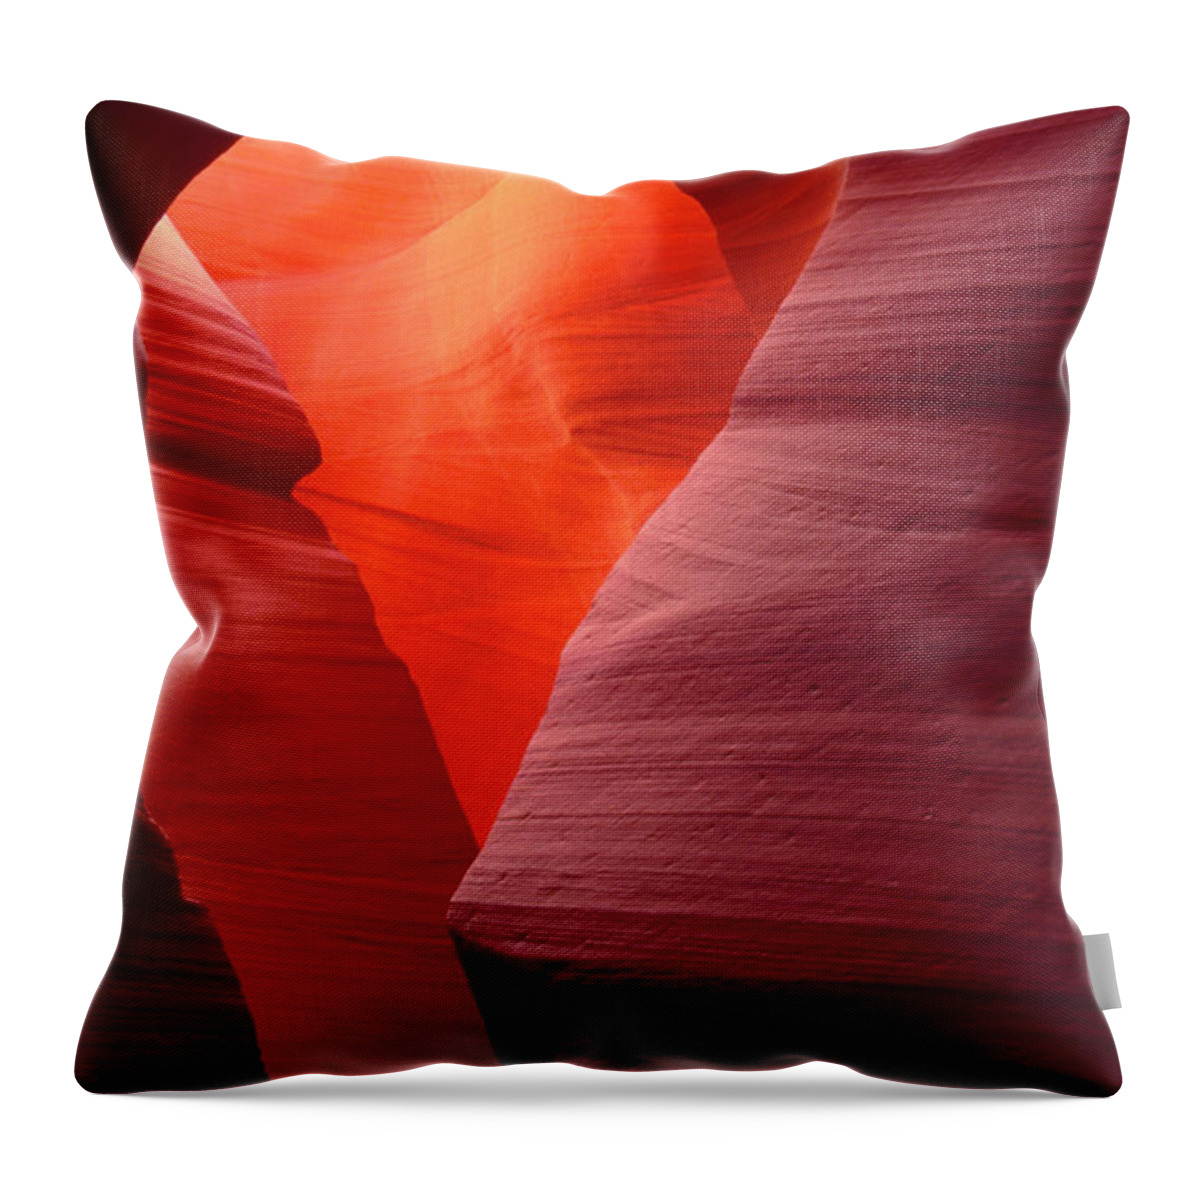 Dave Welling Throw Pillow featuring the photograph Sandstone Abstract Lower Antelope Slot Canyon Arizona by Dave Welling